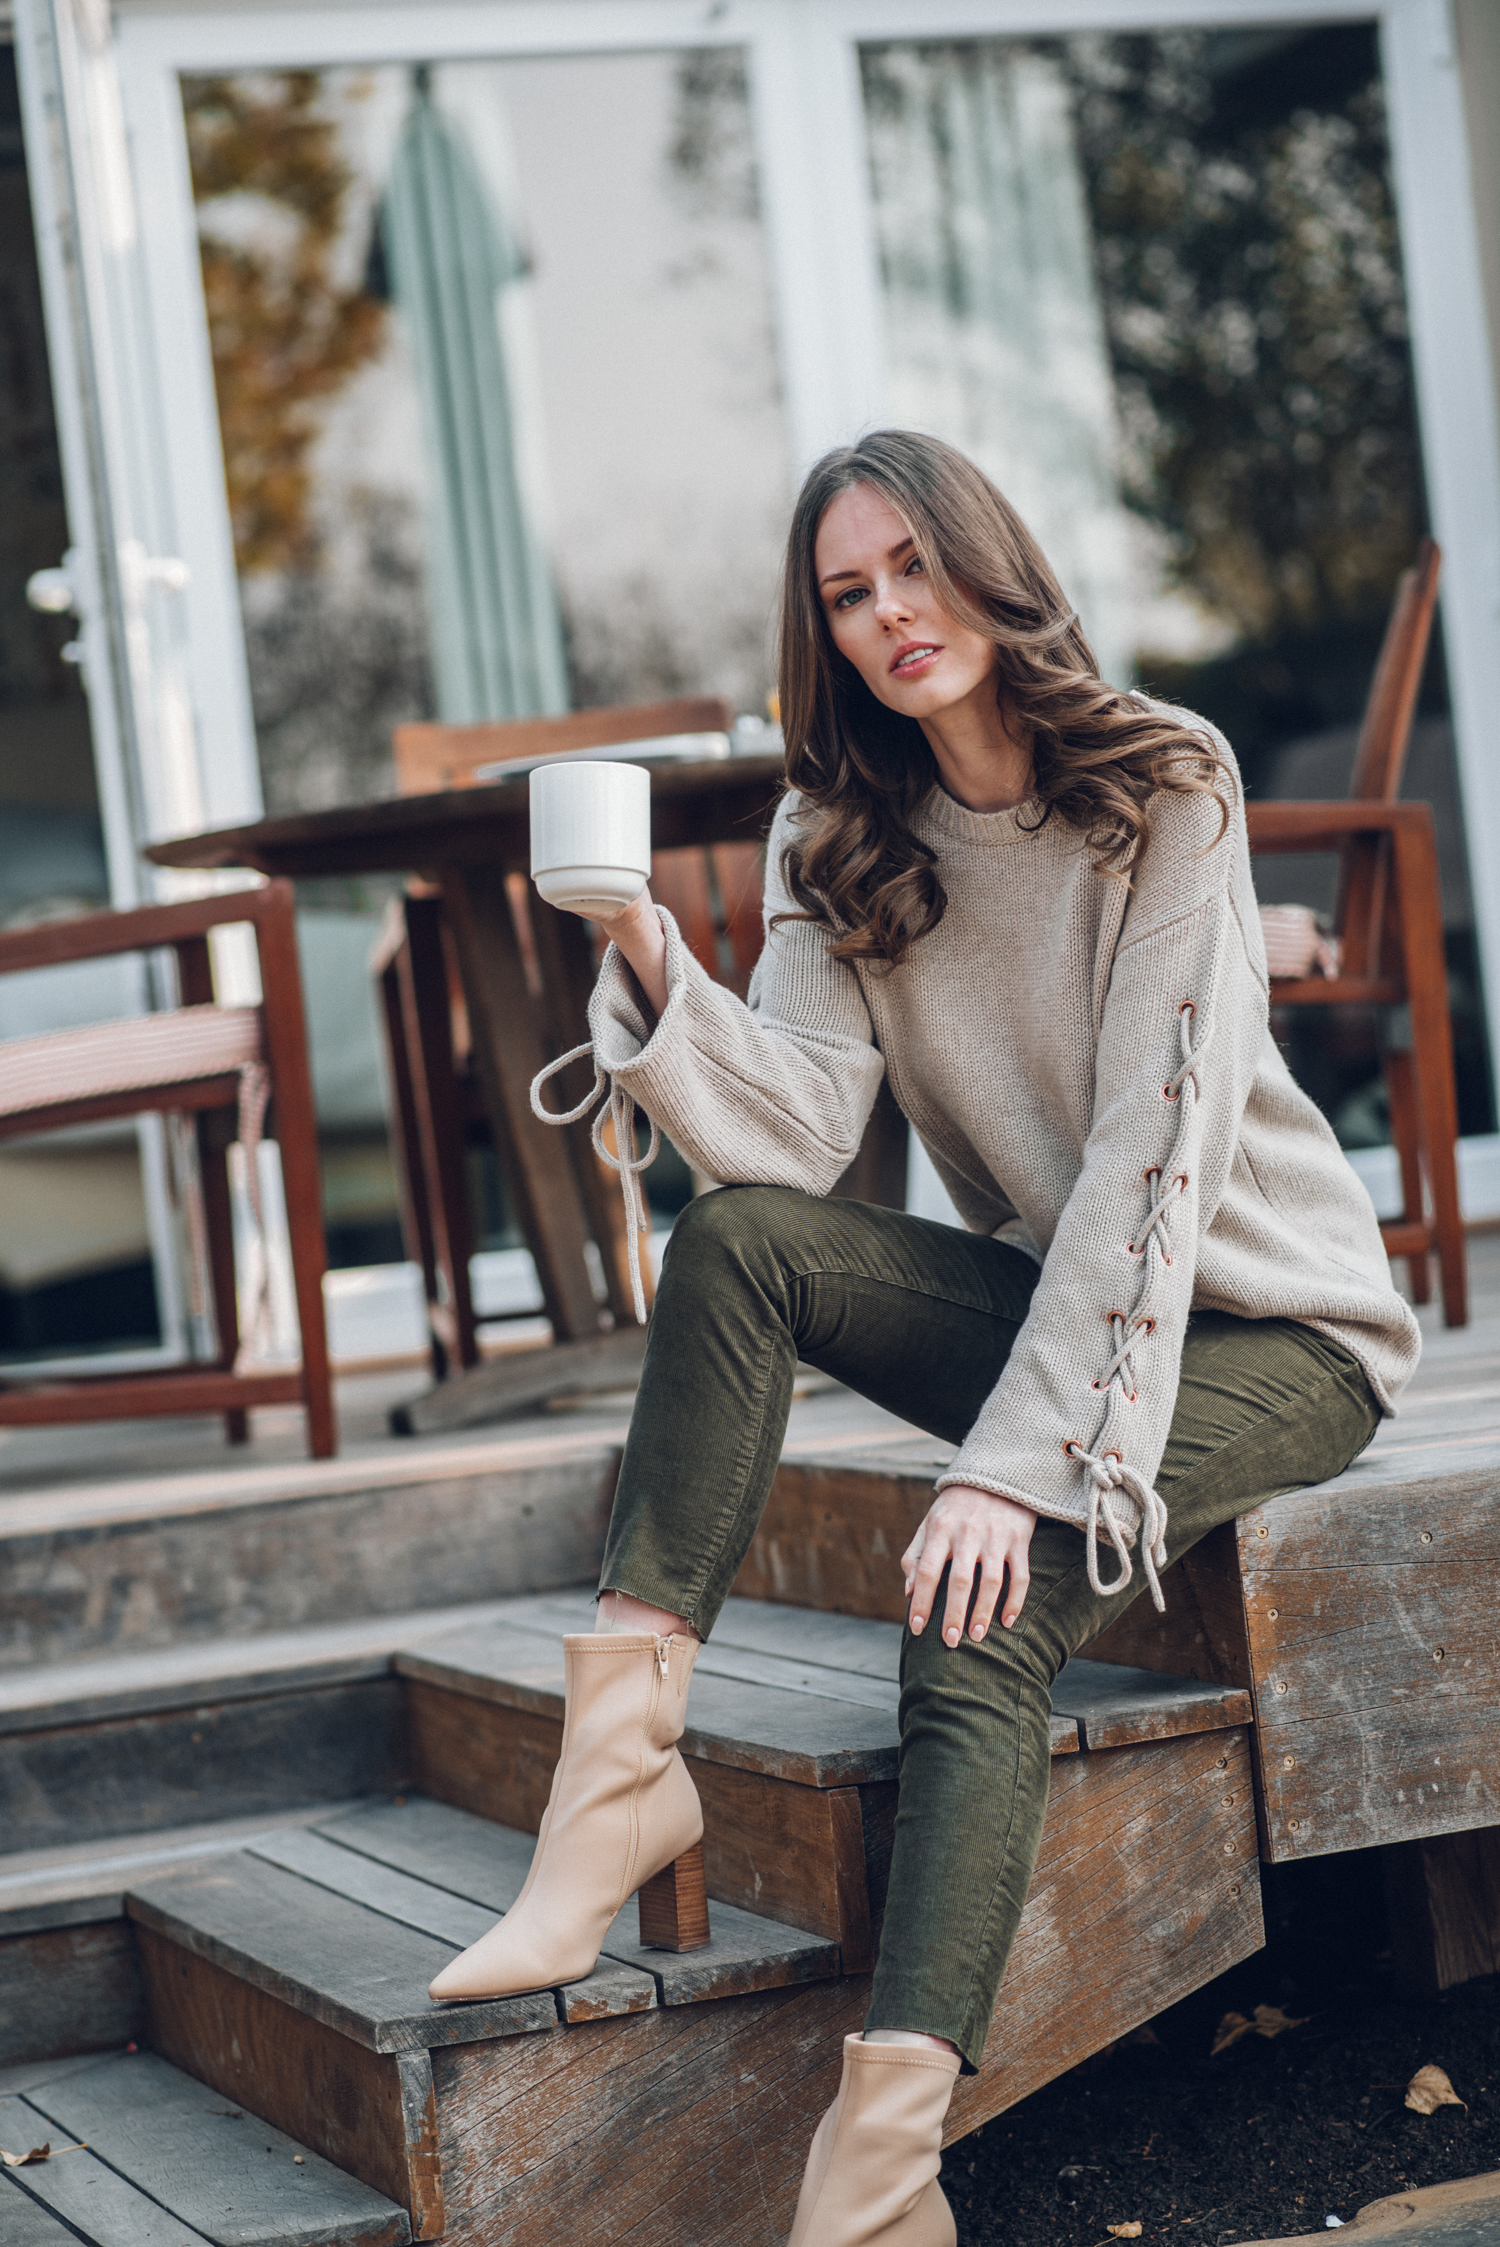 Alyssa Campanella of The A List blog visits Carneros Resort & Spa in November 2018 for cabernet season in a Harvest Cottage wearing See by Chloé lace up sleeve sweater and Jeffrey Campbell siren bootie